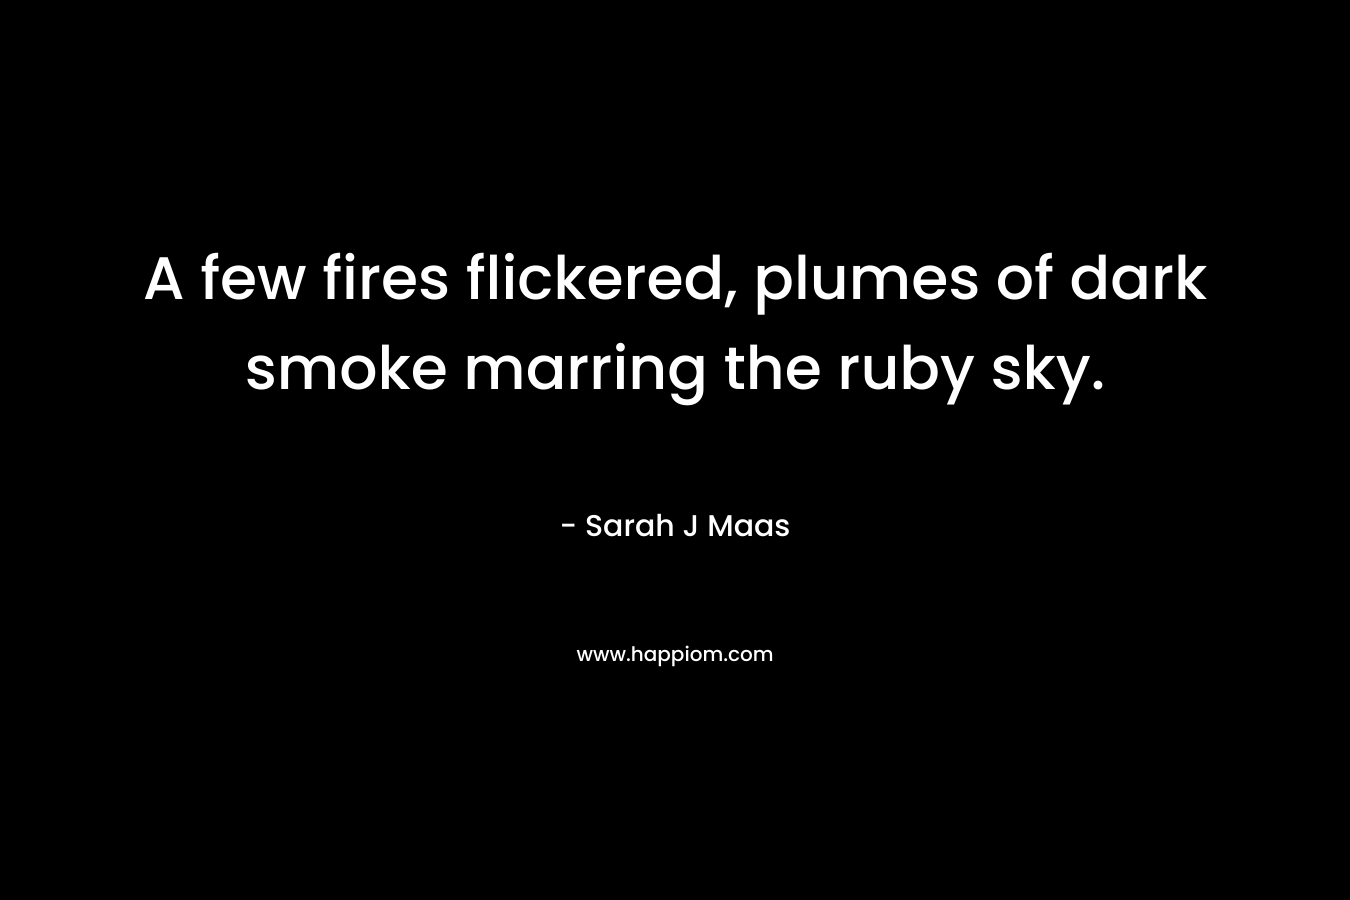 A few fires flickered, plumes of dark smoke marring the ruby sky. – Sarah J Maas